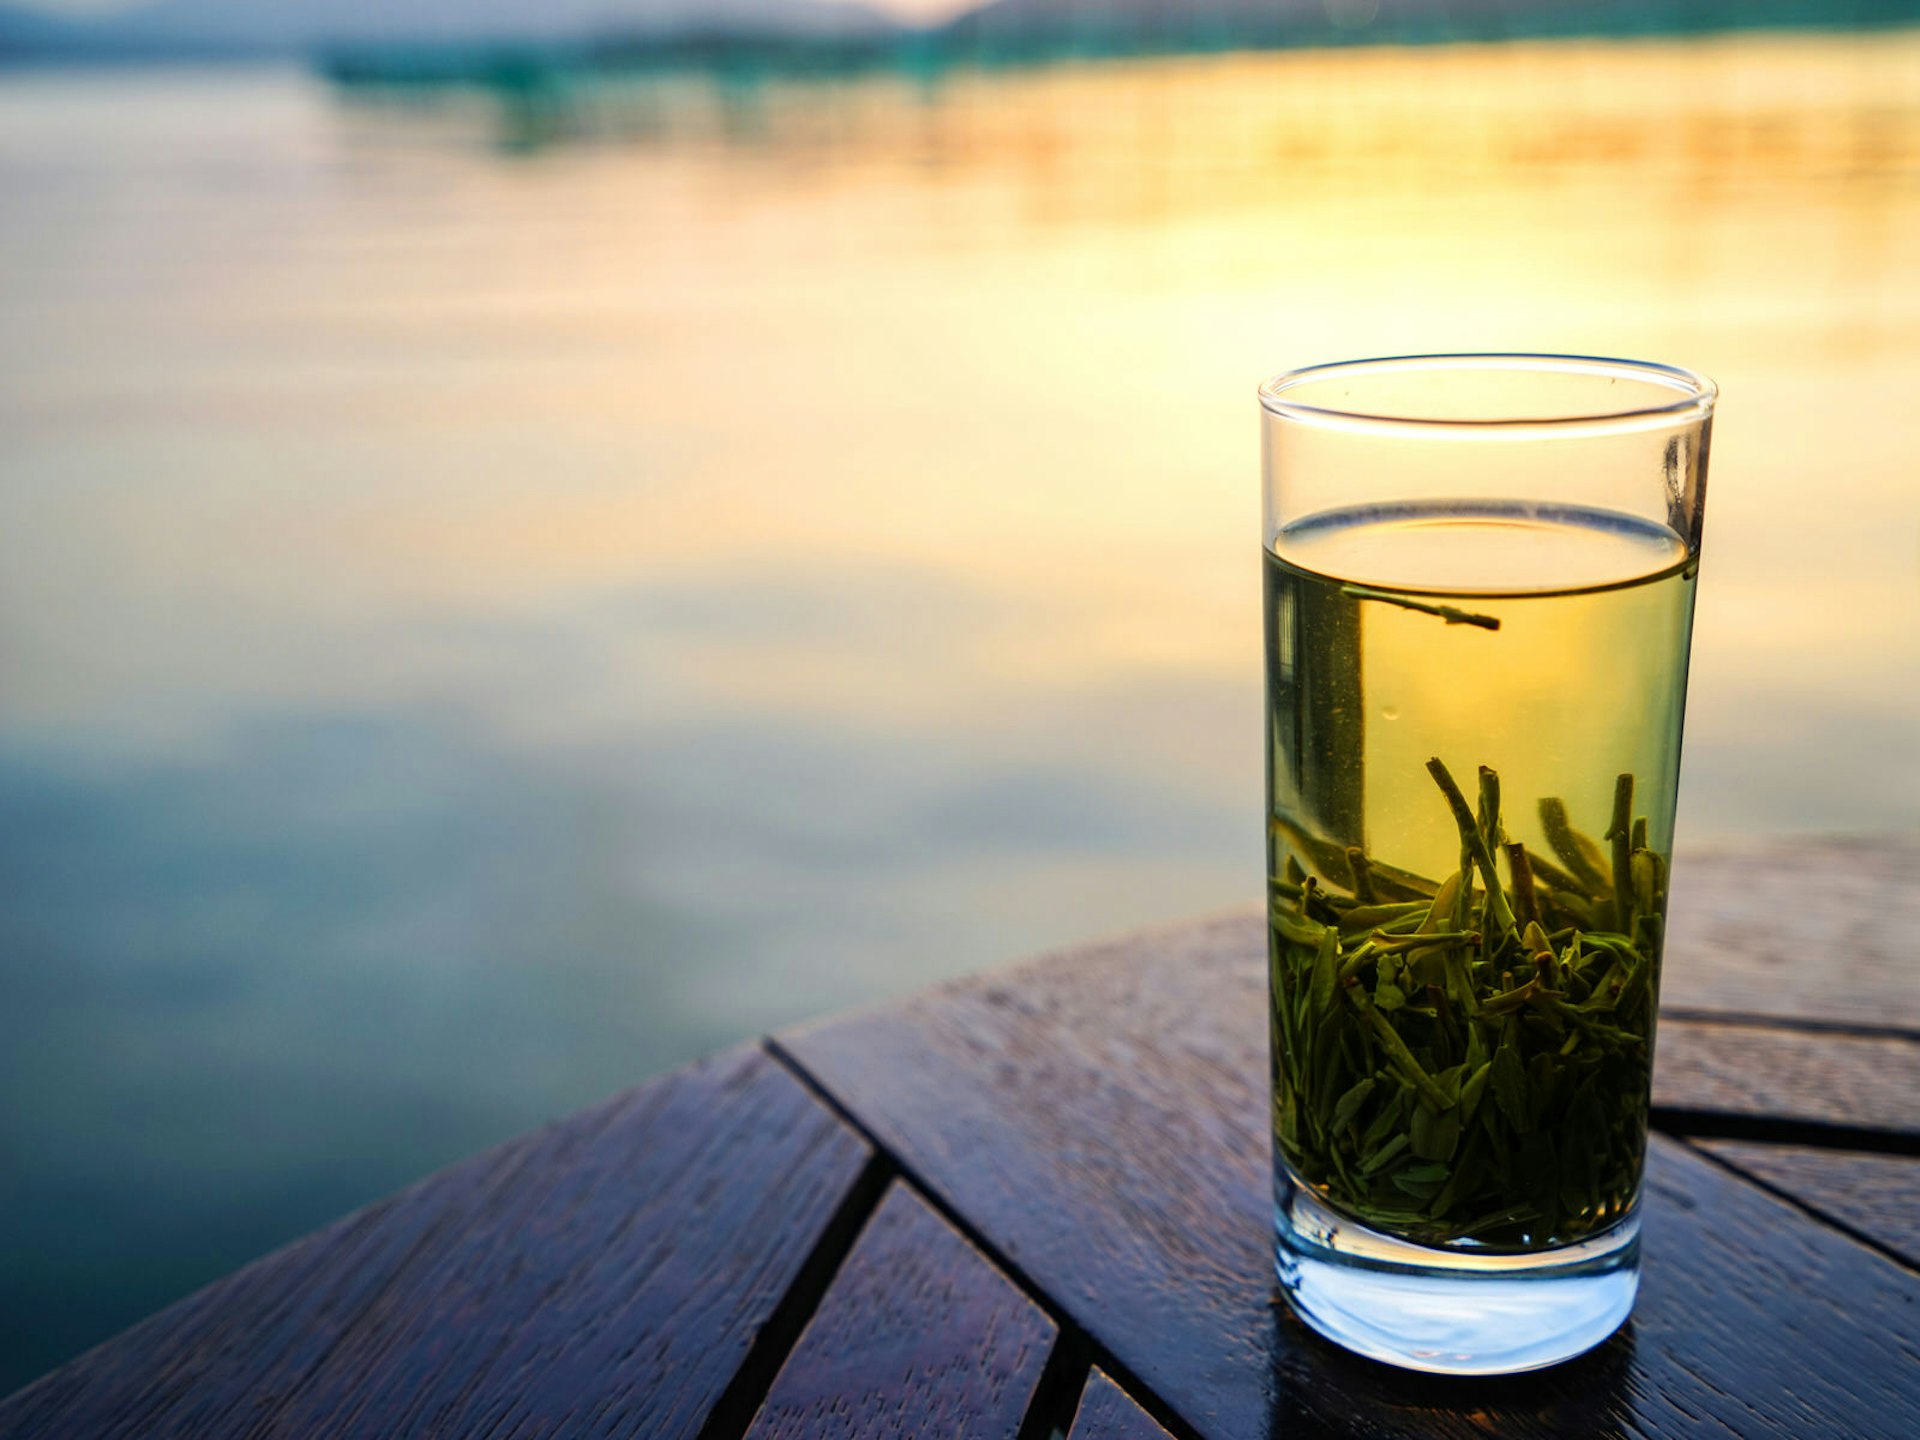 A cup of green tea settled in a tall, clear glass, with sunset reflecting in a pond in the background.